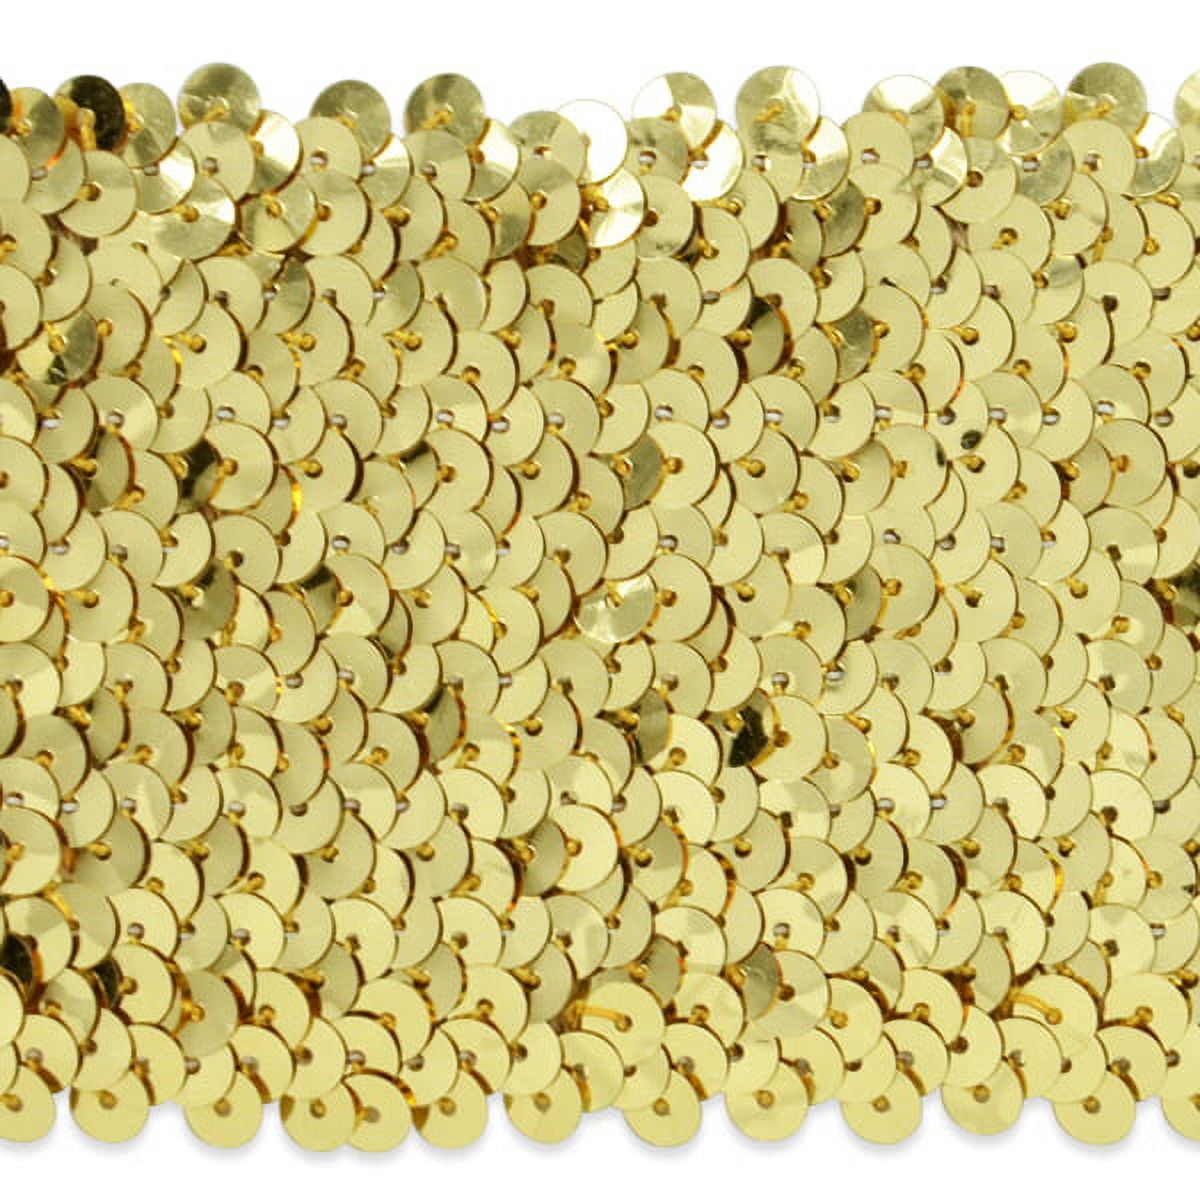 Expo Int'l 8 Row Starlight Hologram Stretch Sequin Trim by The Yard, Gold